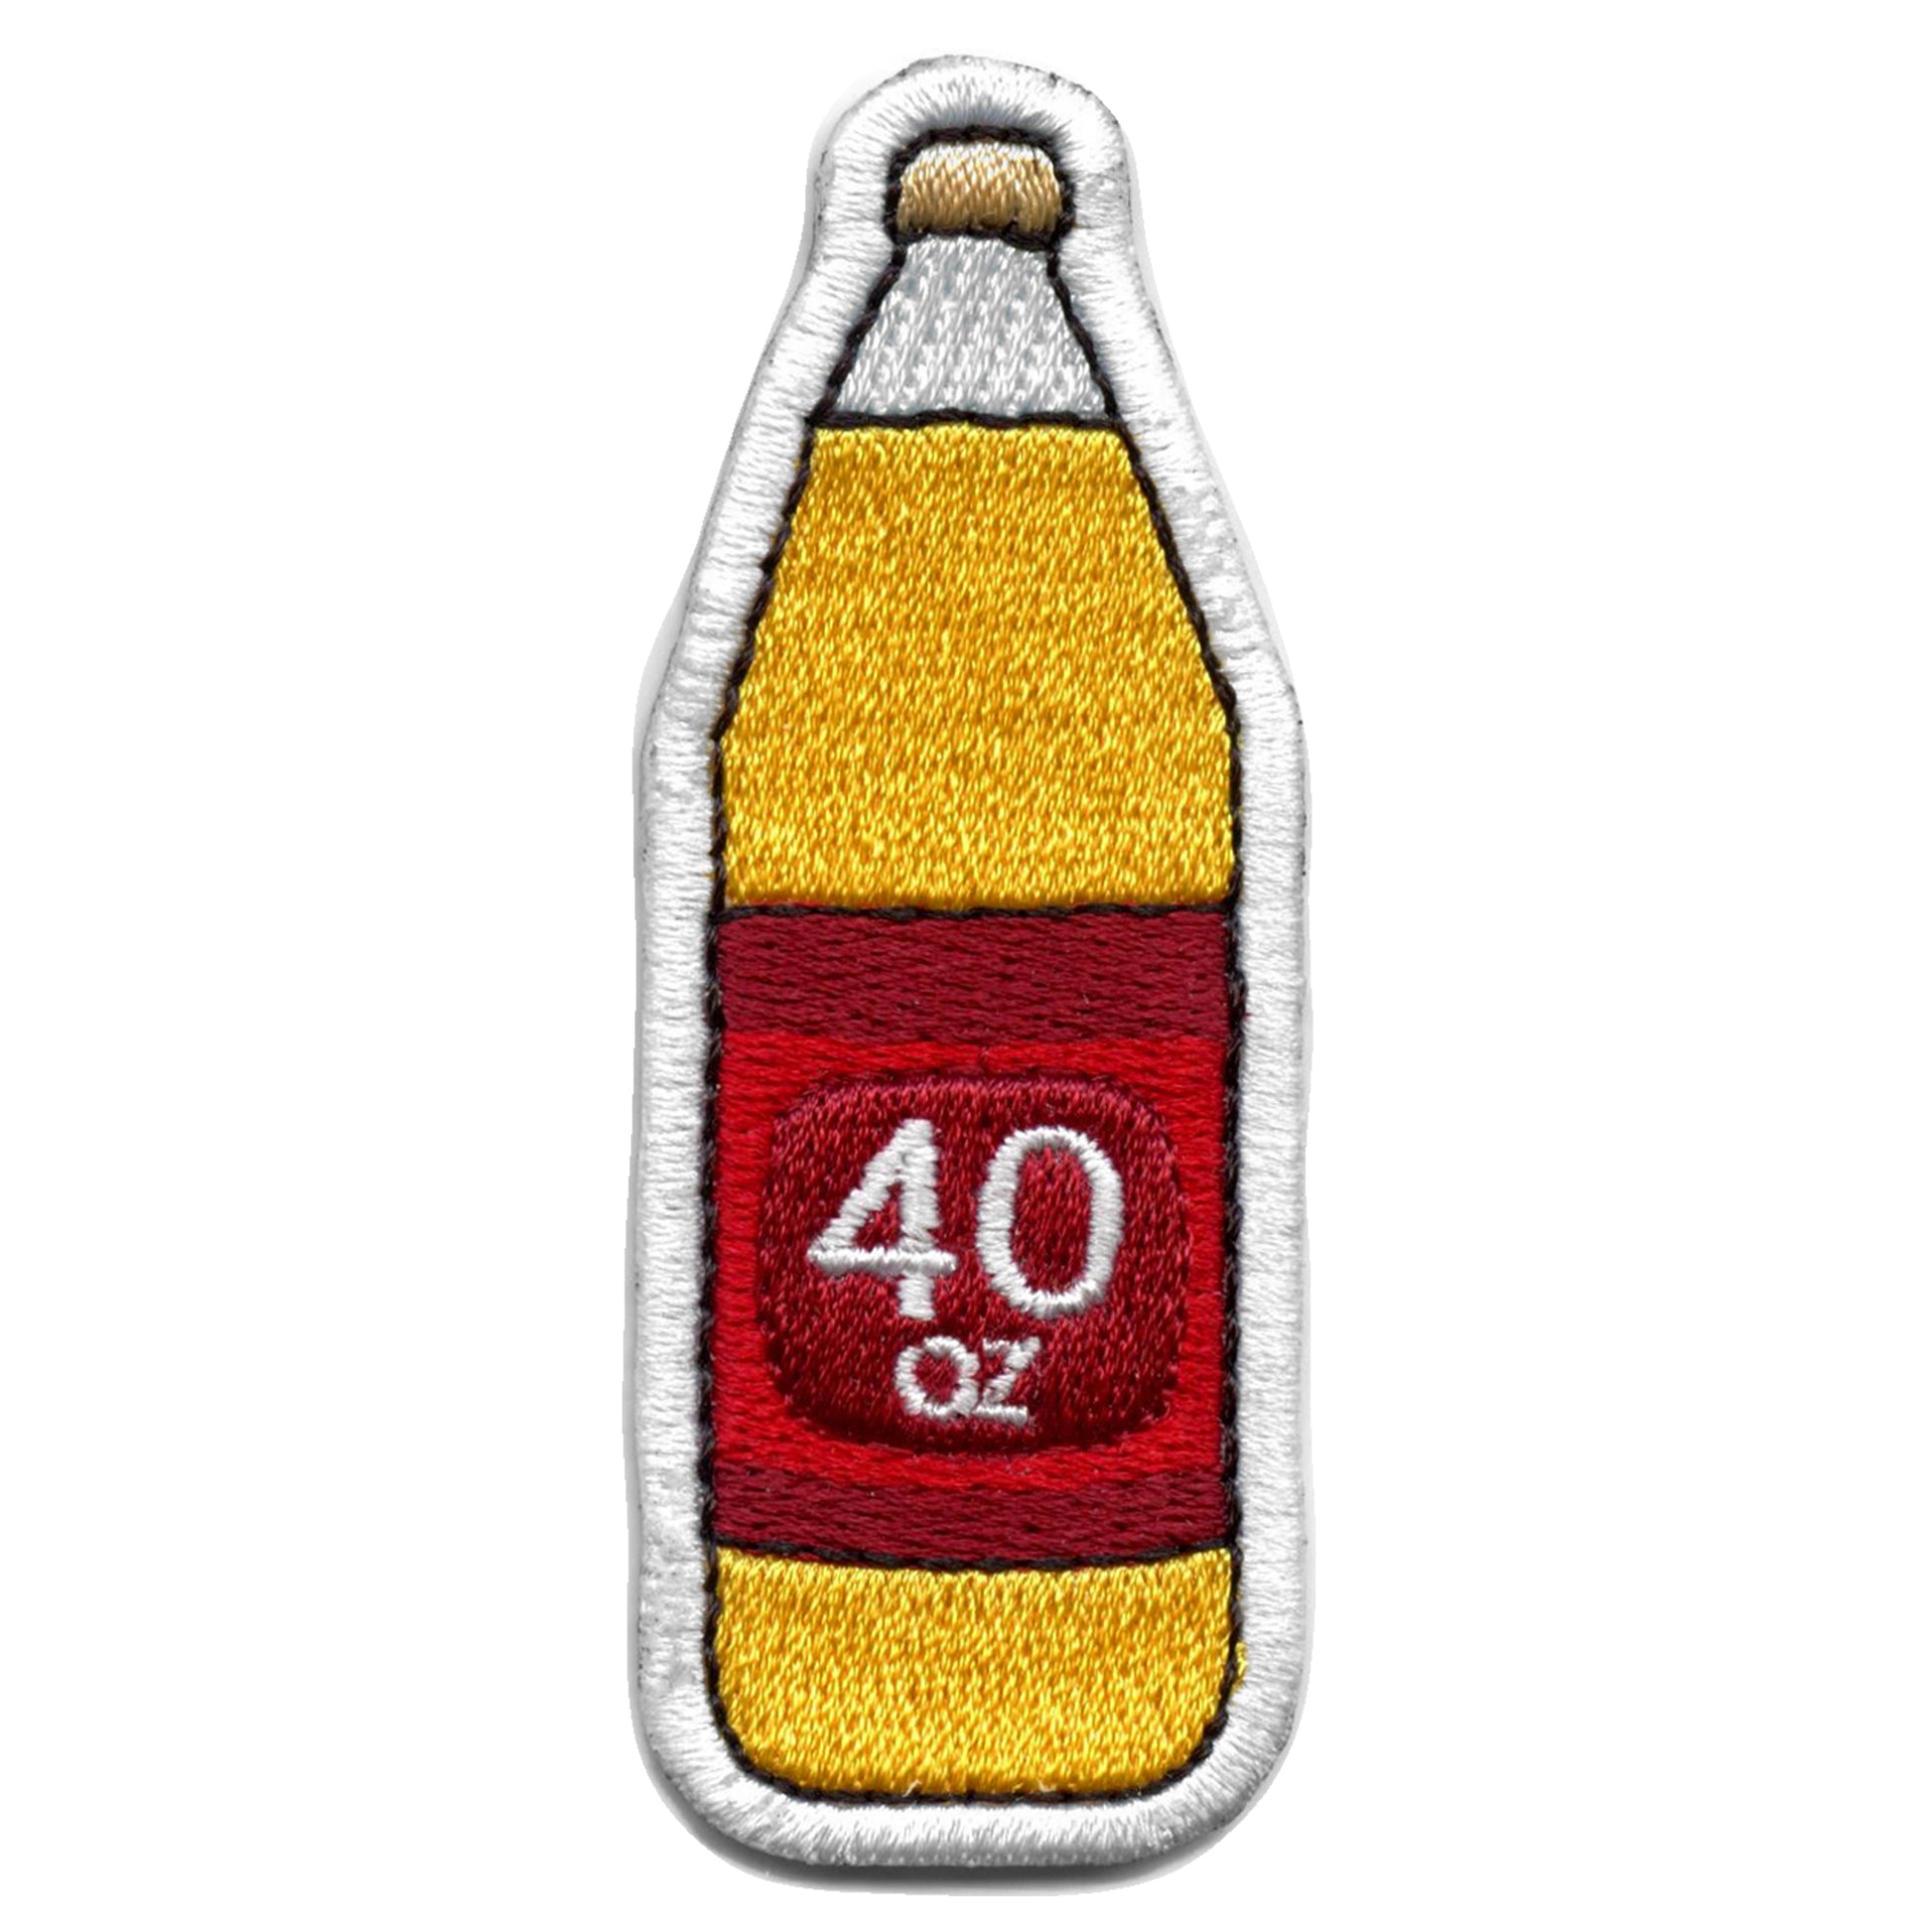 40oz Beer Bottle Patch Funny Old School Embroidered Iron On 